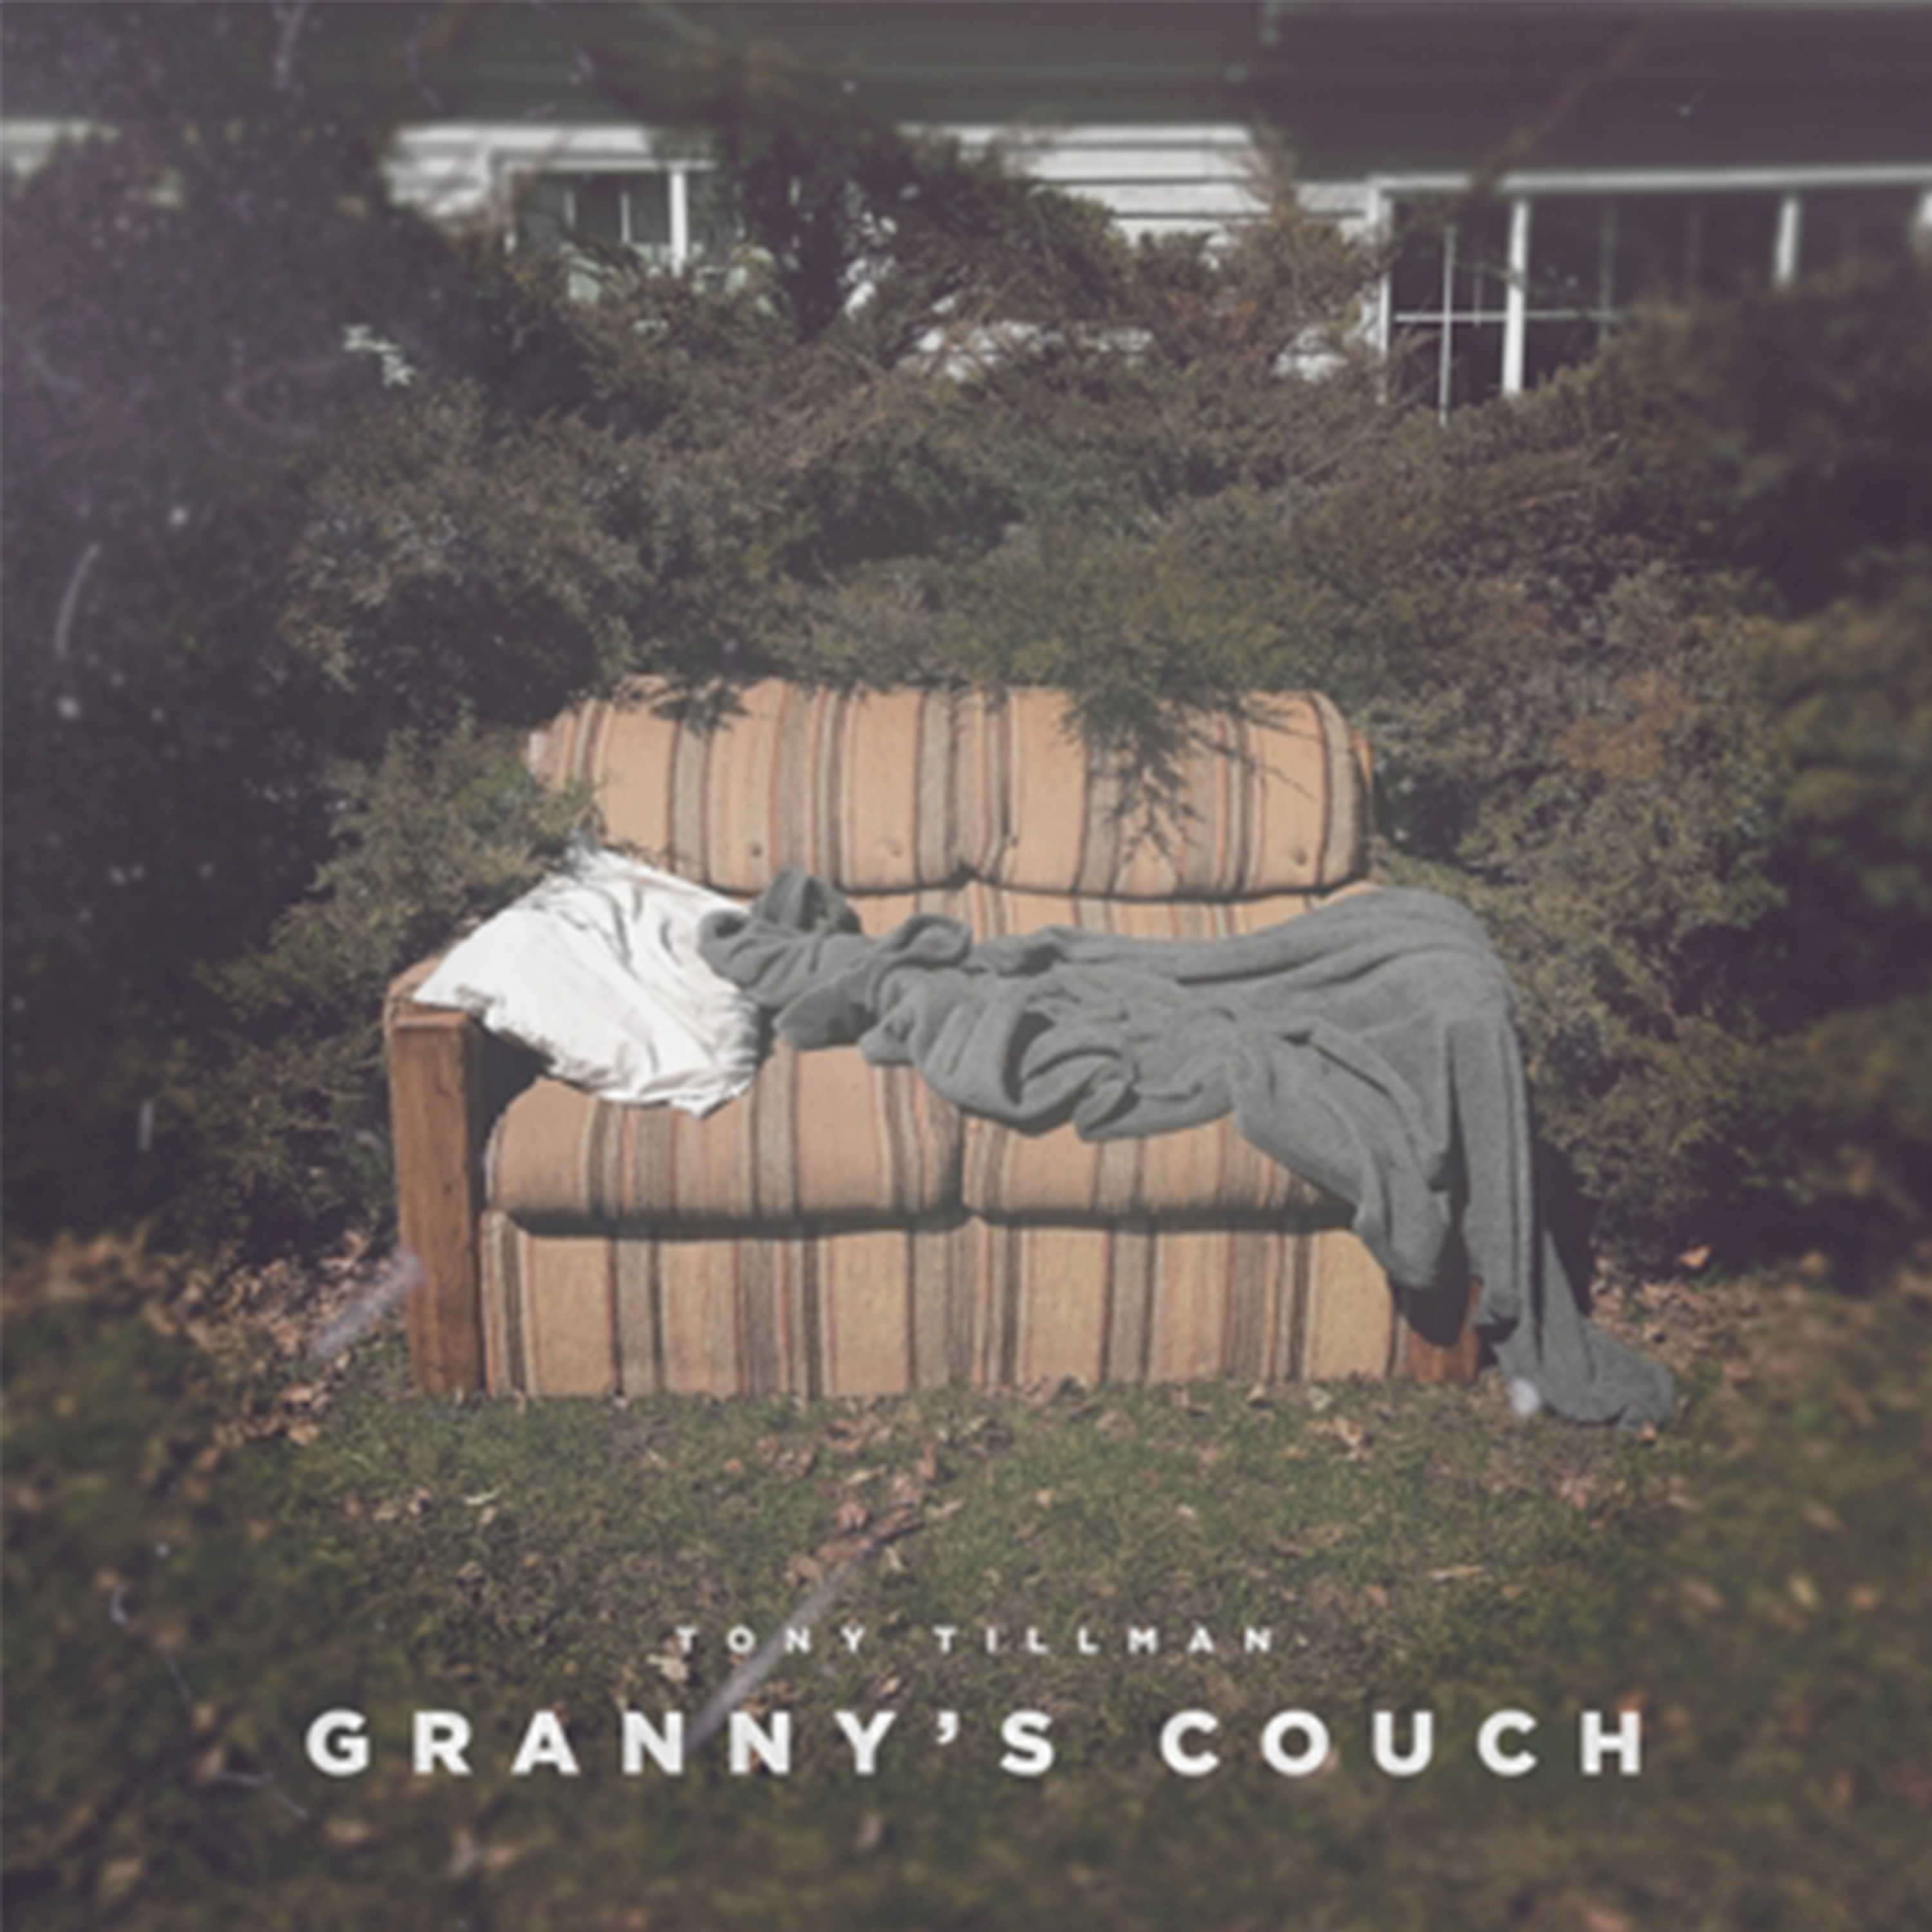 Granny's Couch